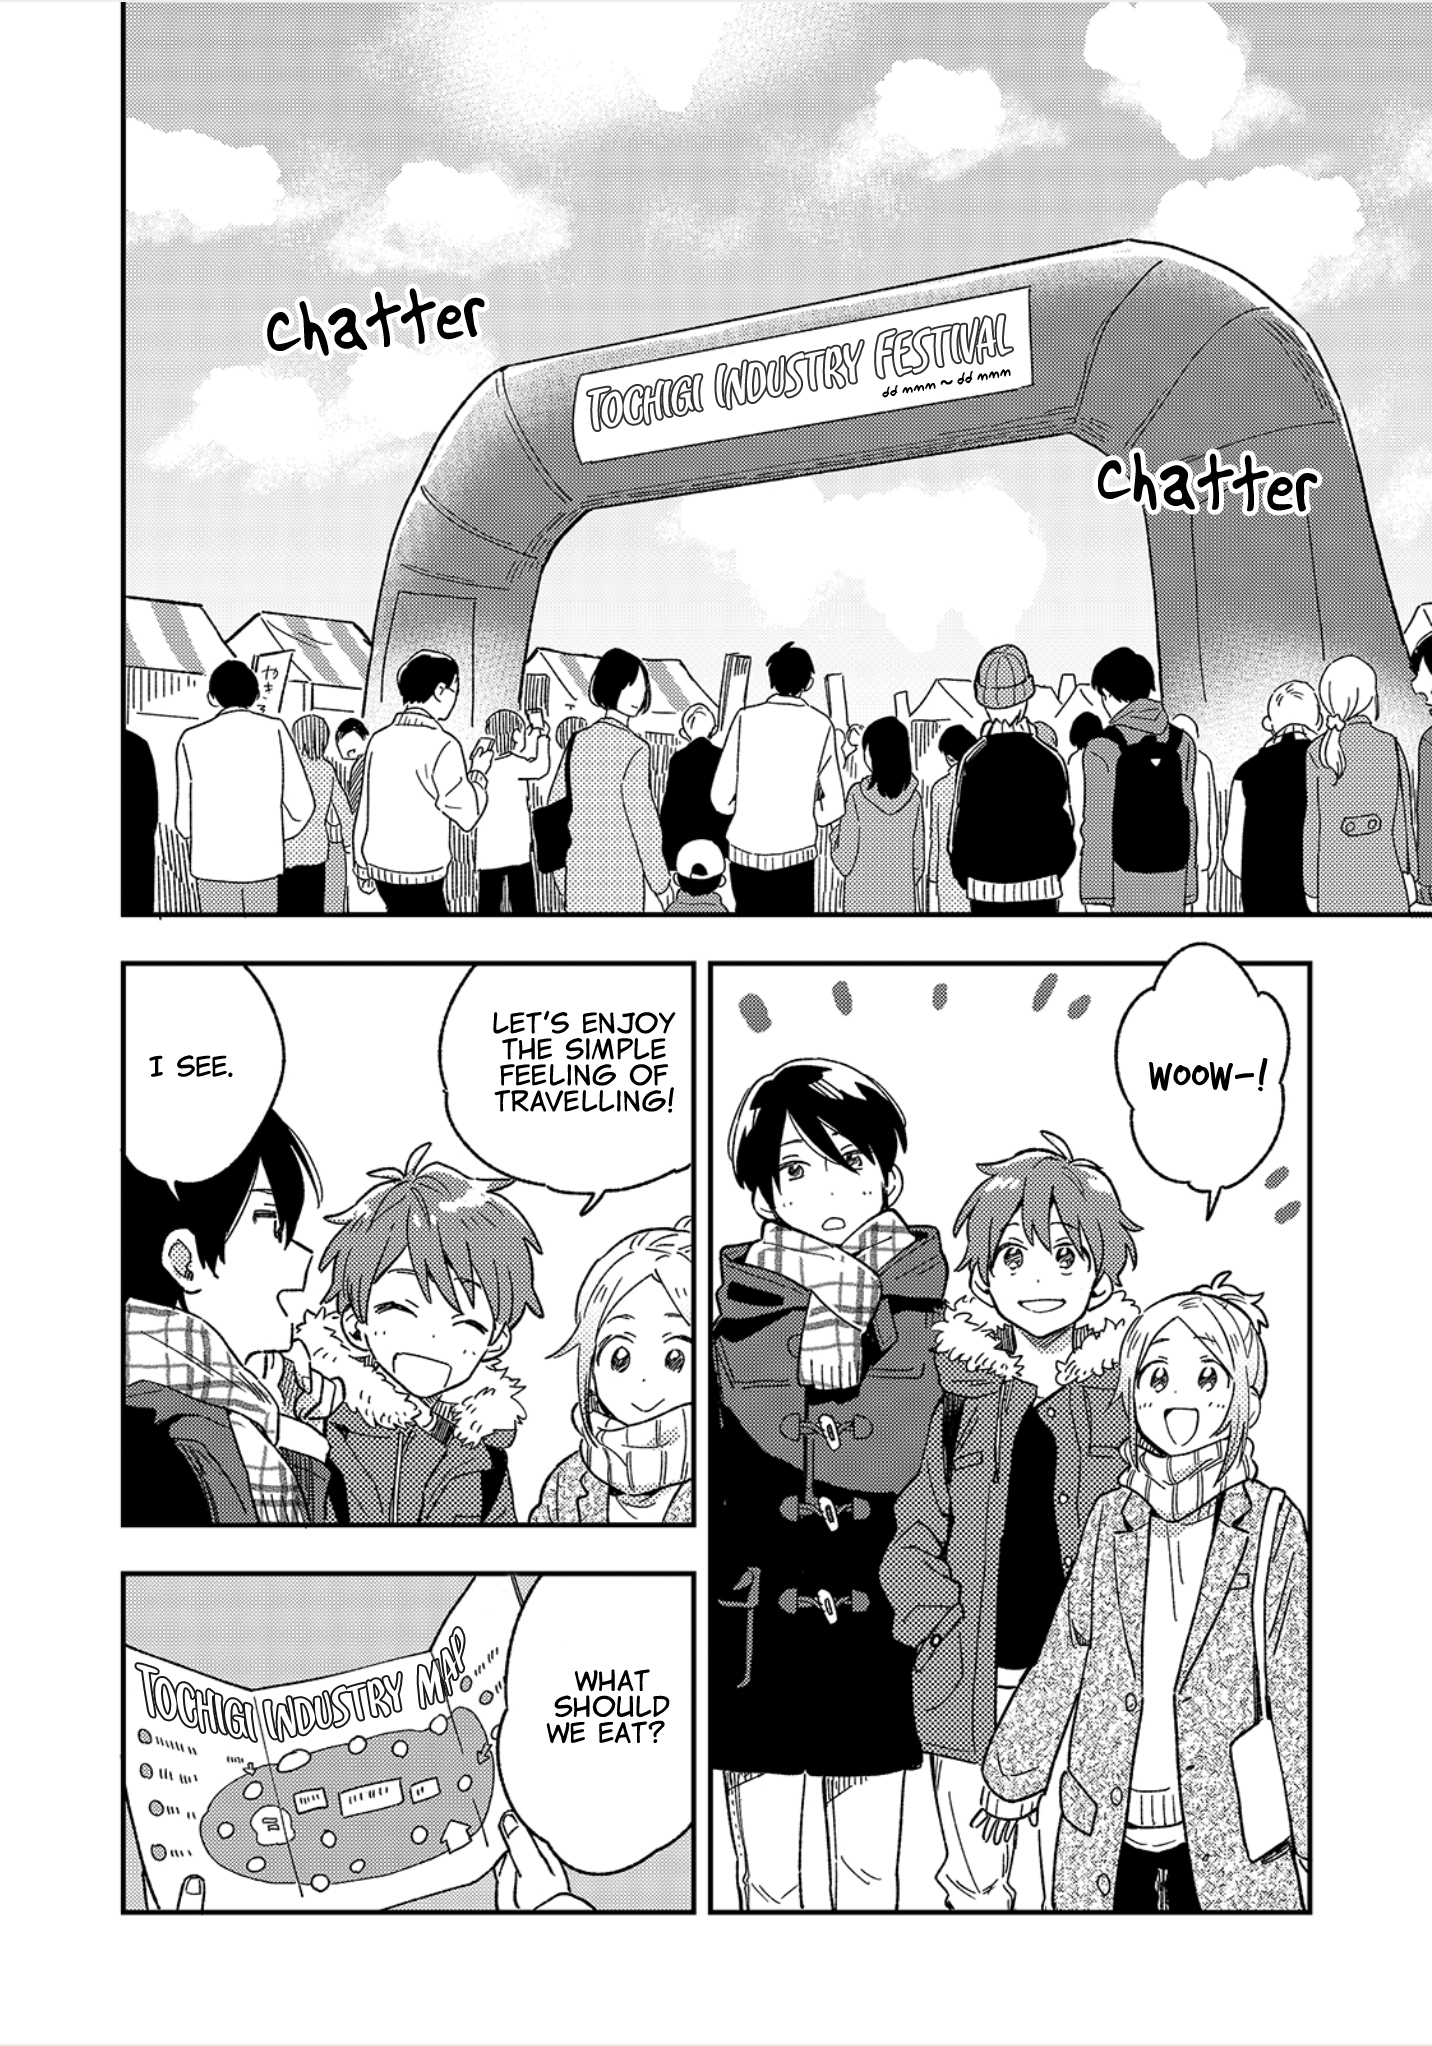 The Male High School Students Are Hungry Again Today vol.1 ch.7